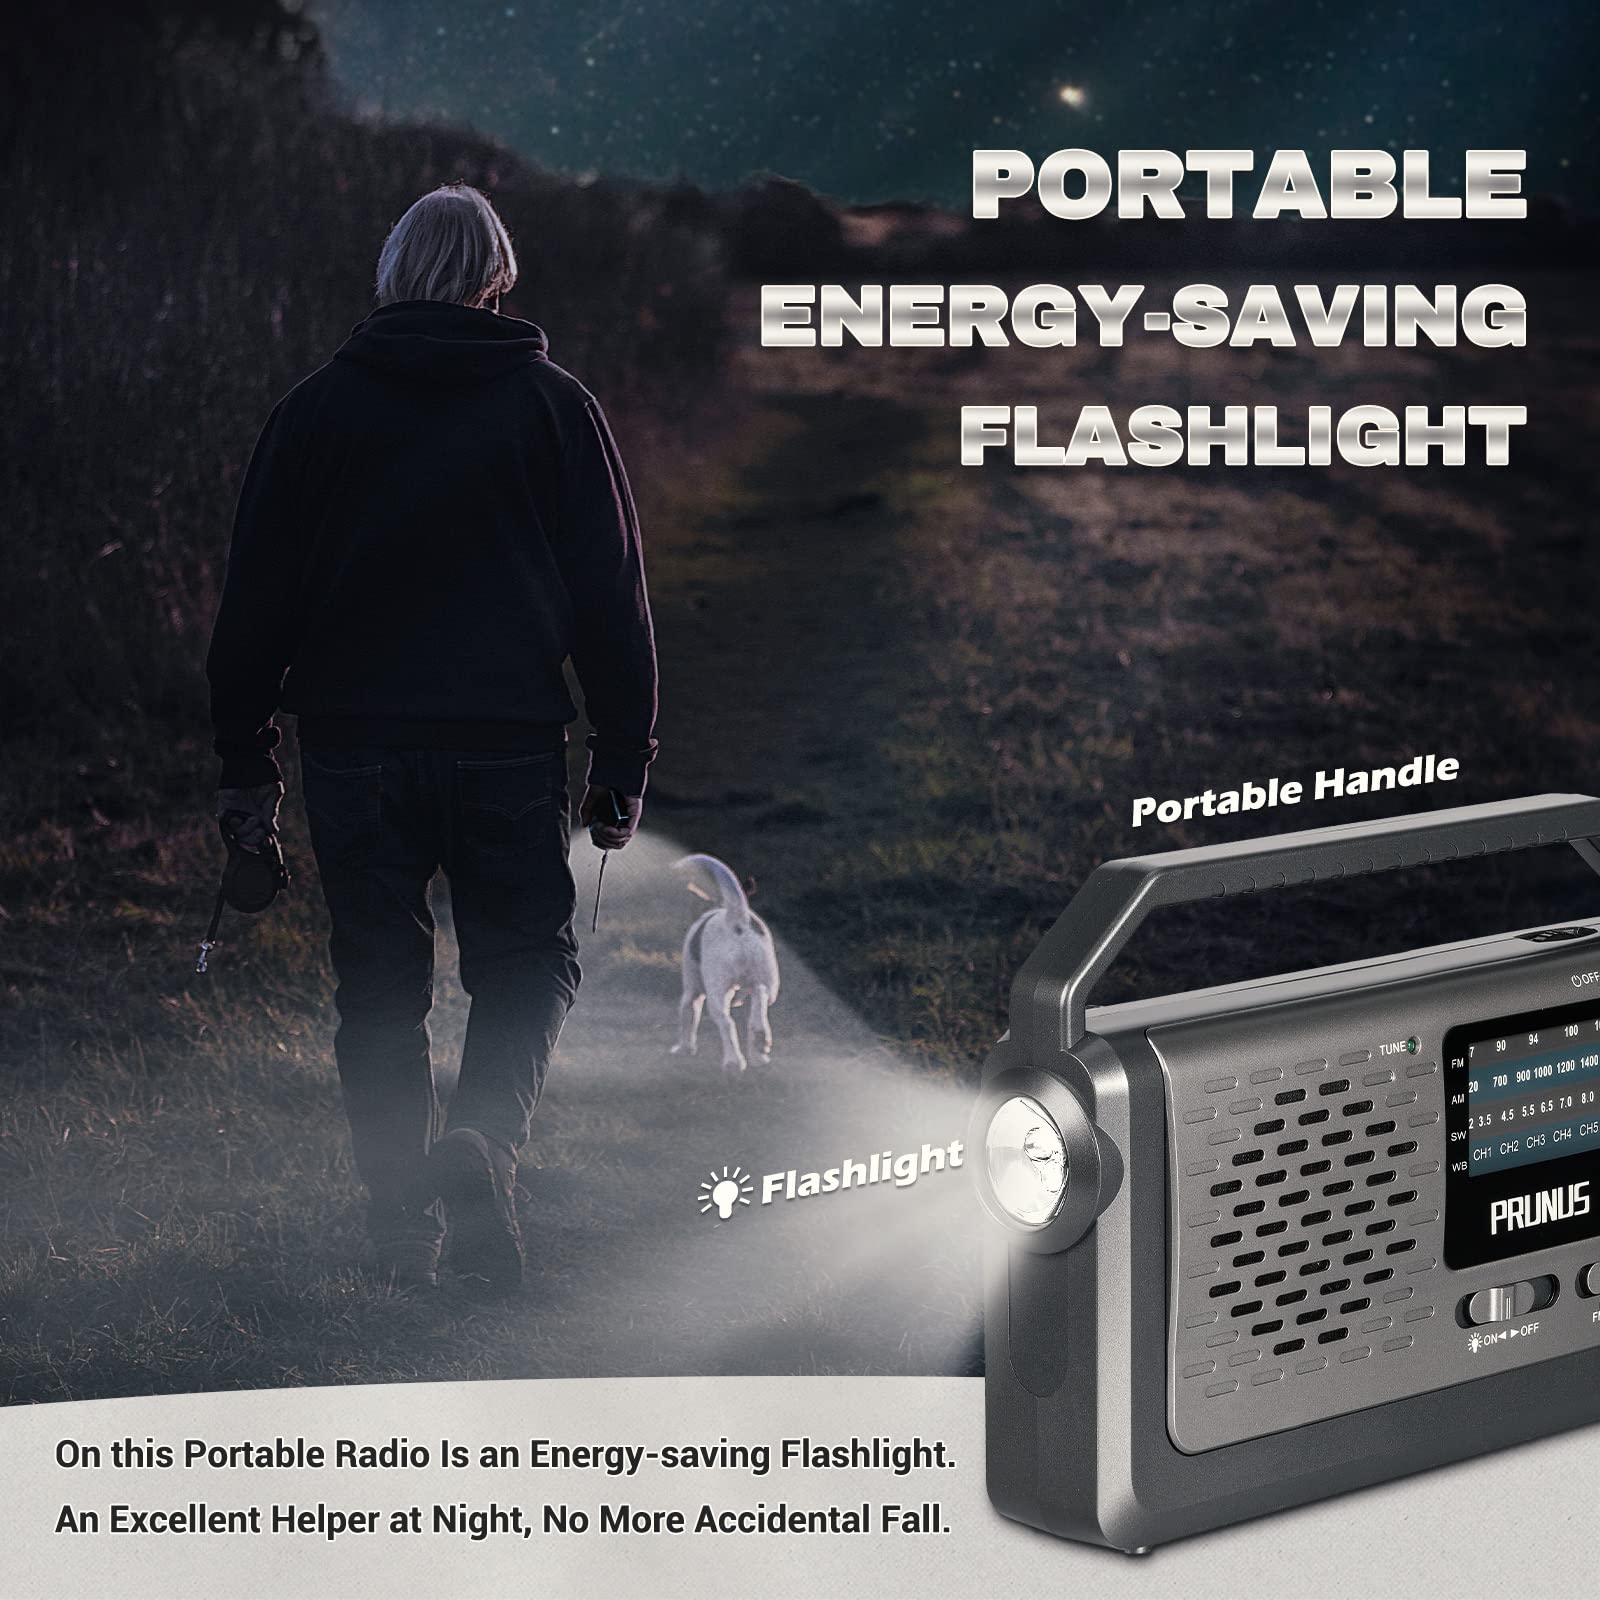 NOAA Weather AM FM Portable Radio with Best Reception, Flashlight, Earphone Jack, Battery Operated Radio by 3X D Cell Batteries or AC Power for Home/Outdoor/Gift,by PRUNUS J15WB